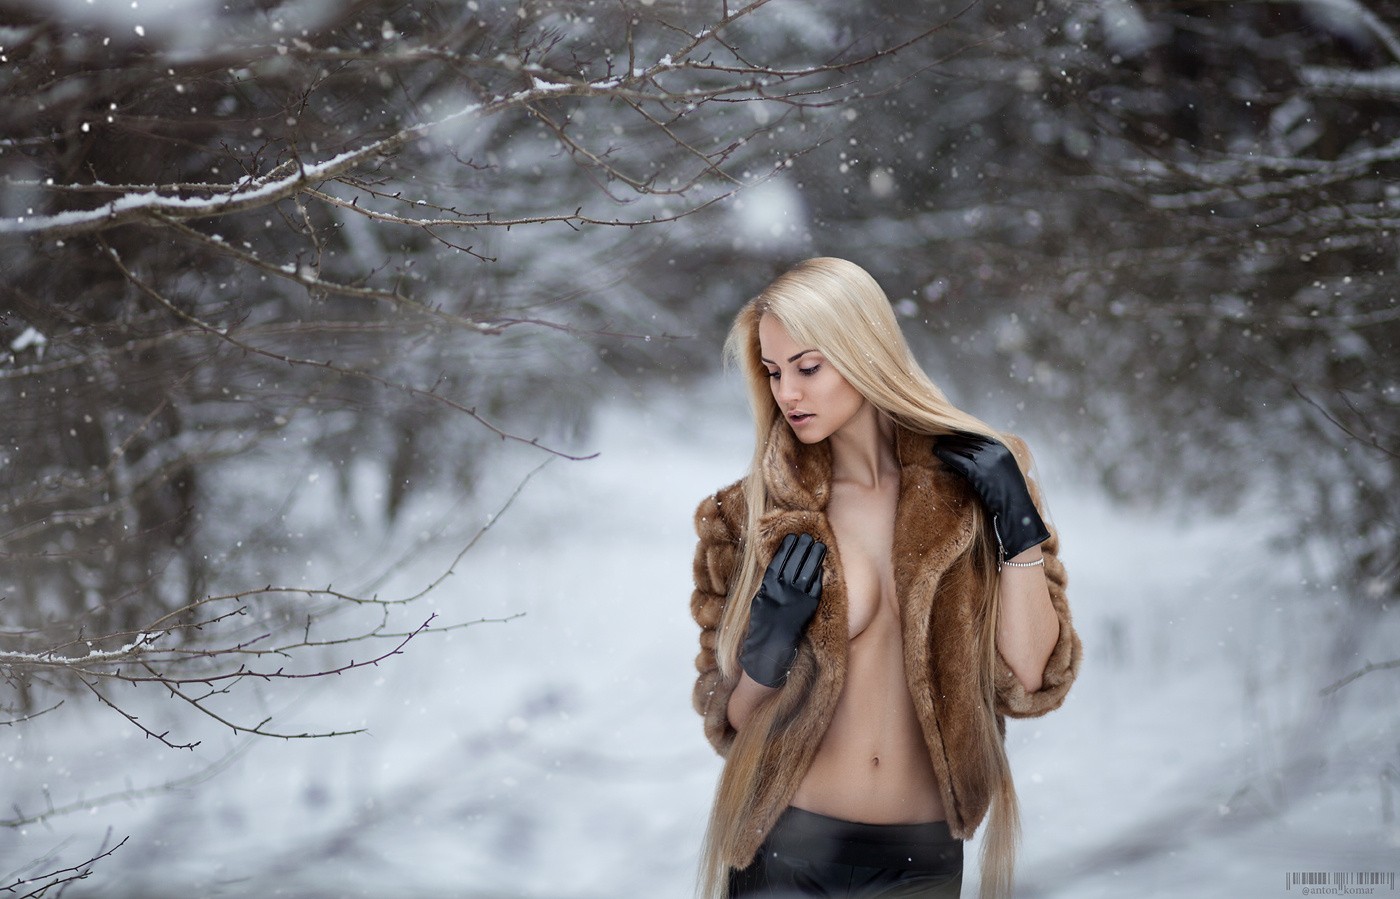 People 1400x899 women snow winter women outdoors cleavage blonde no bra gloves Anton Komar long hair looking away fur jacket black gloves partially clothed undone clothing strategic covering straight hair boobs belly makeup cold outdoors watermarked